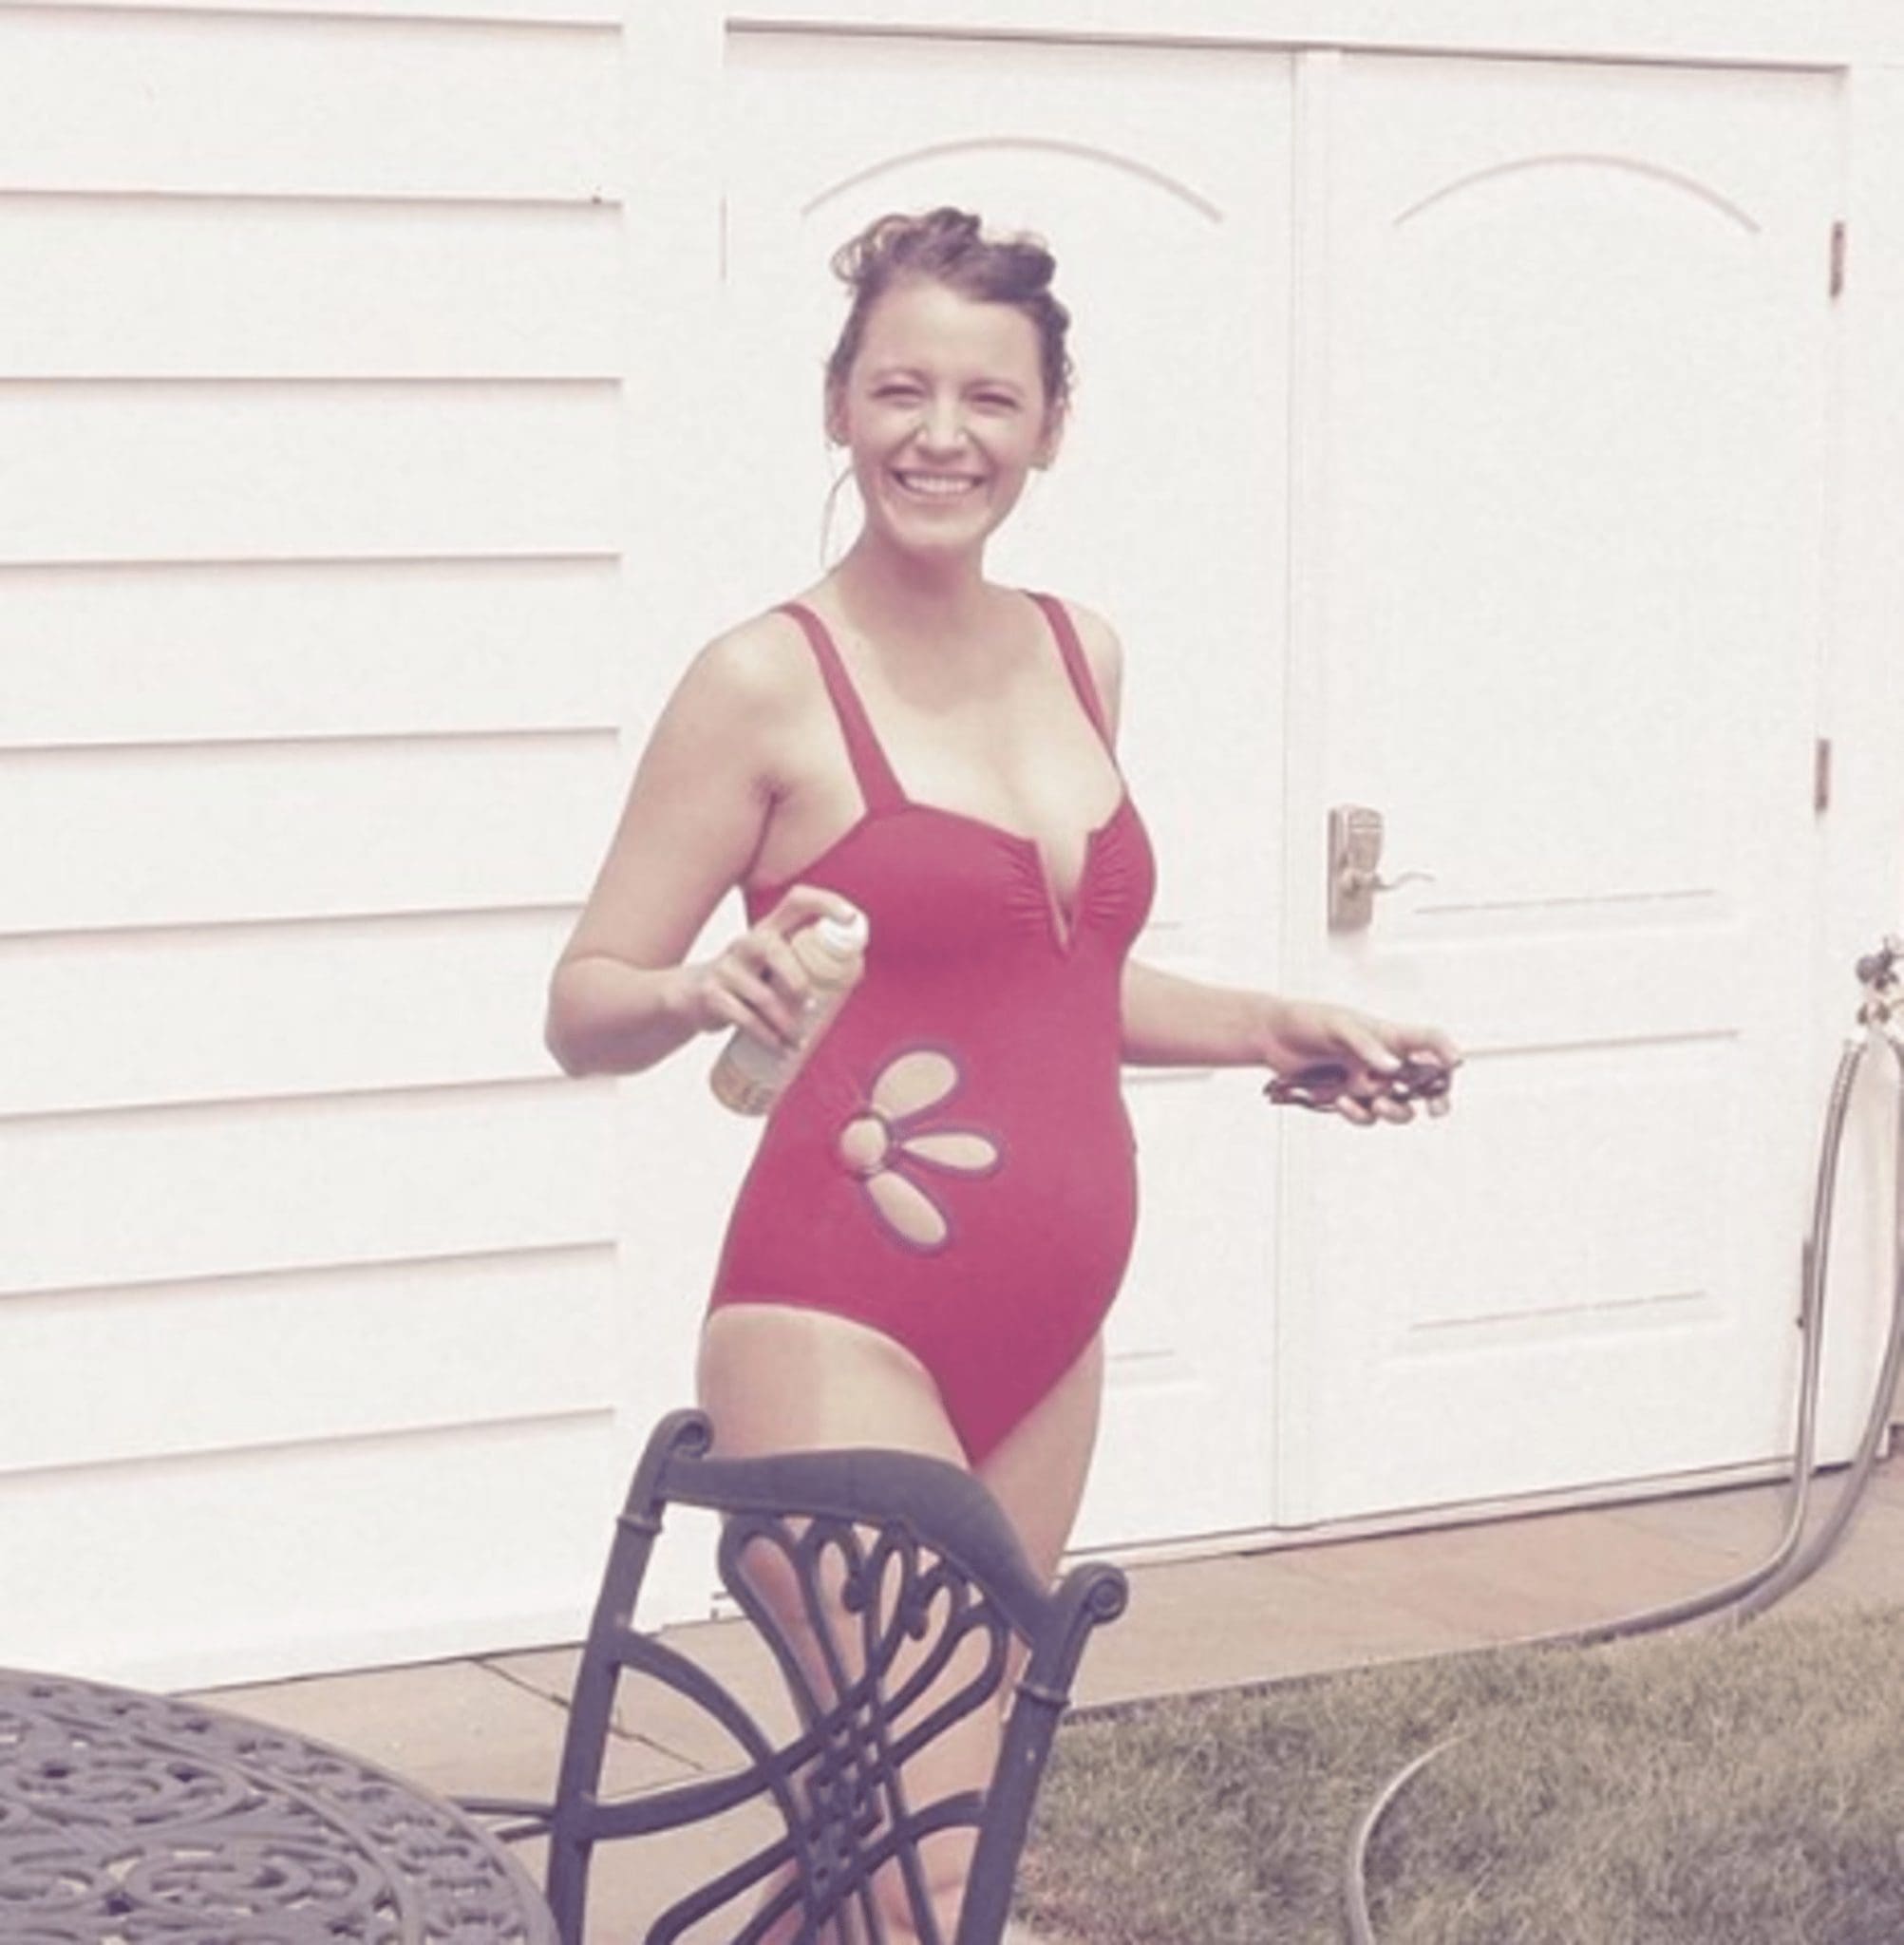 Blake Lively Bares Her Baby Bump To Avoid Photographers